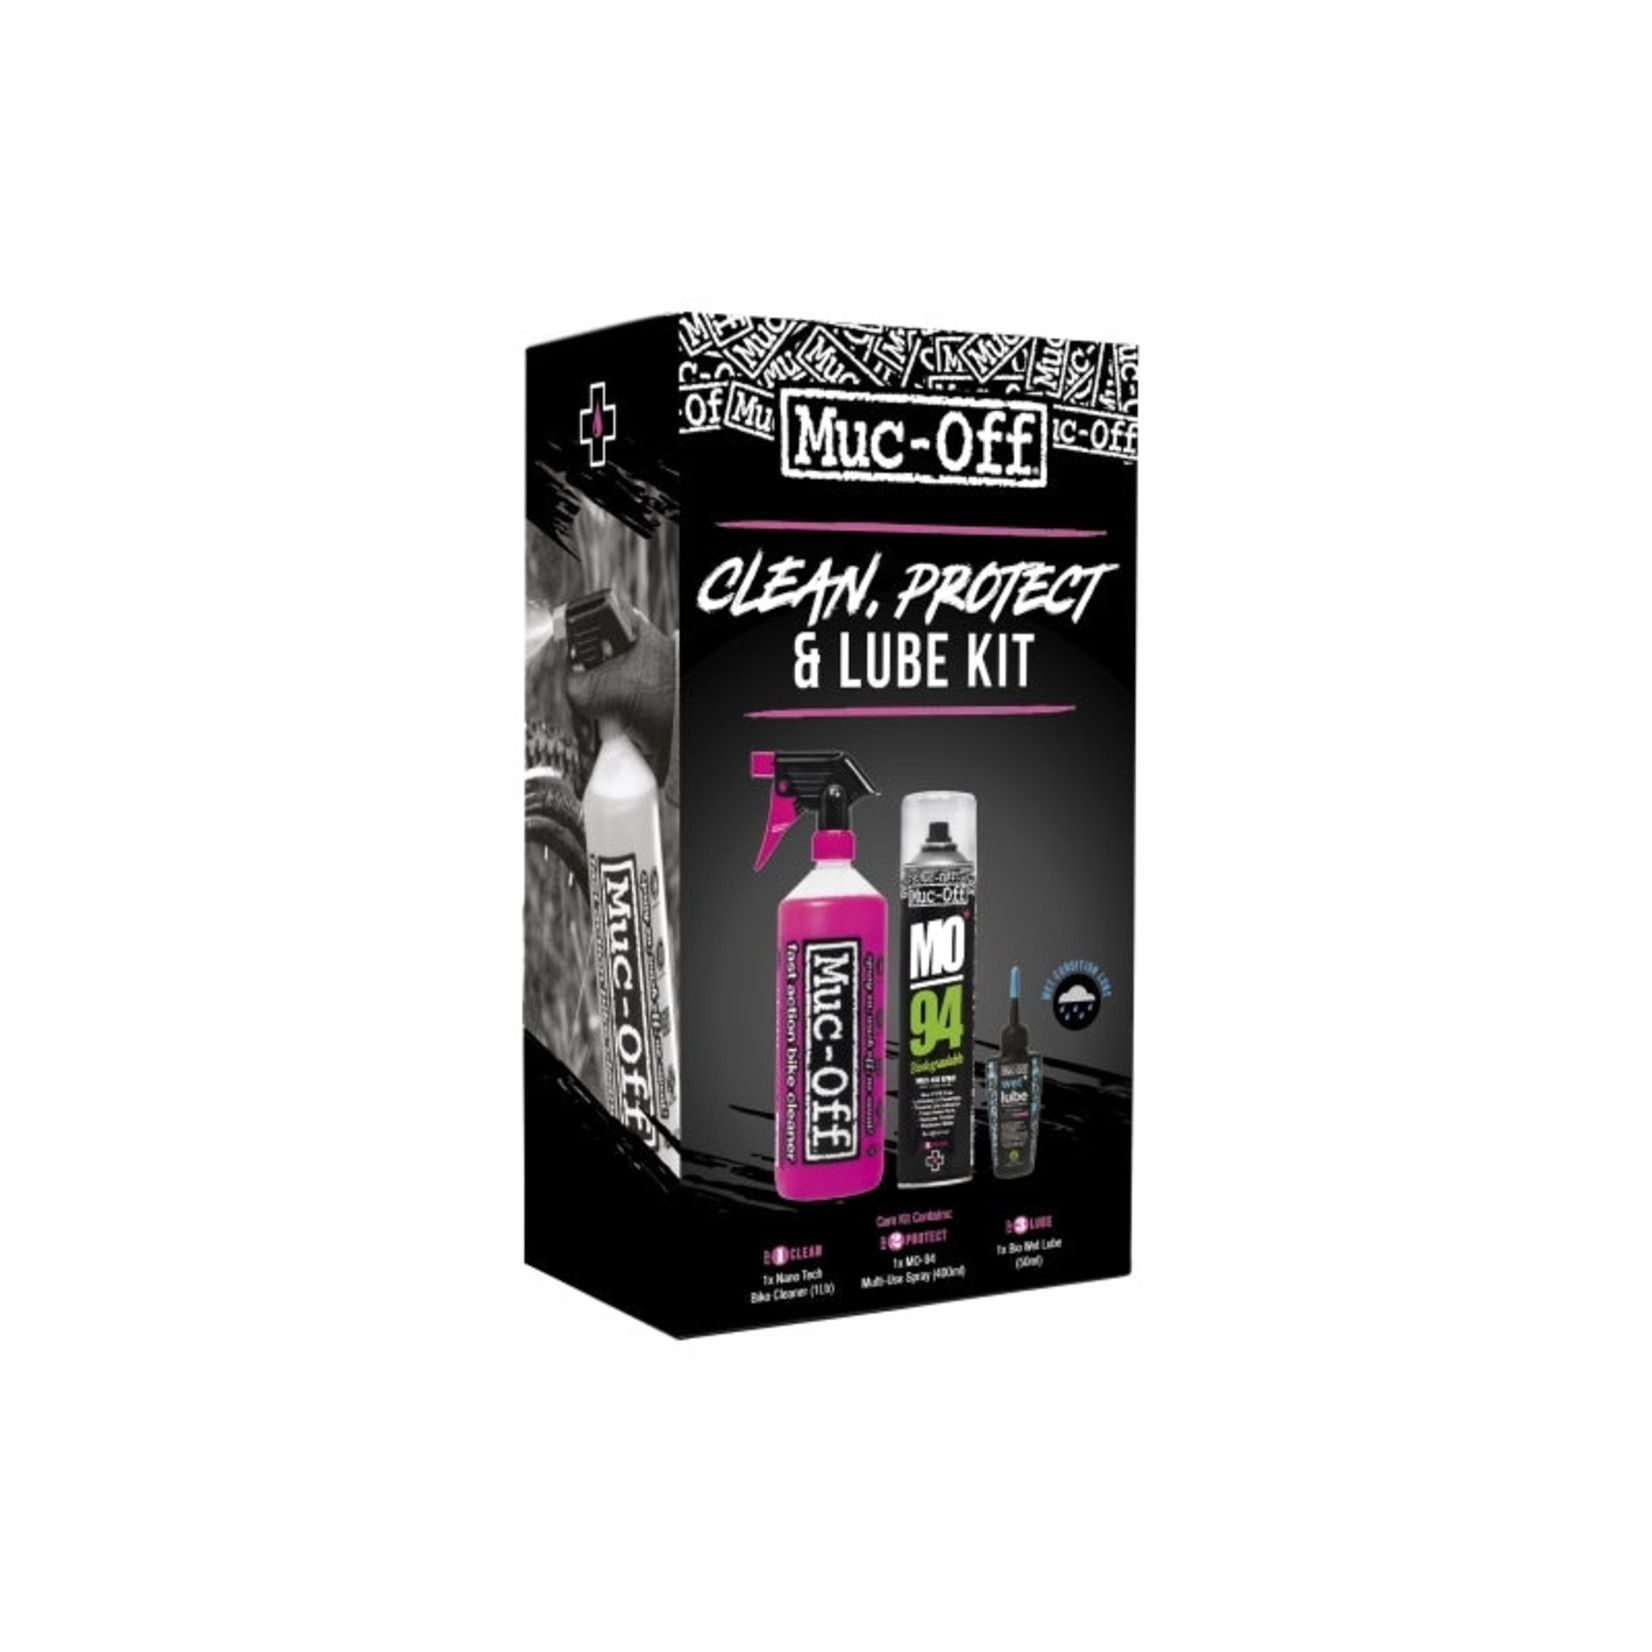 Master the Art of Bike Care: HOW TO Clean, Protect & Lube YOUR